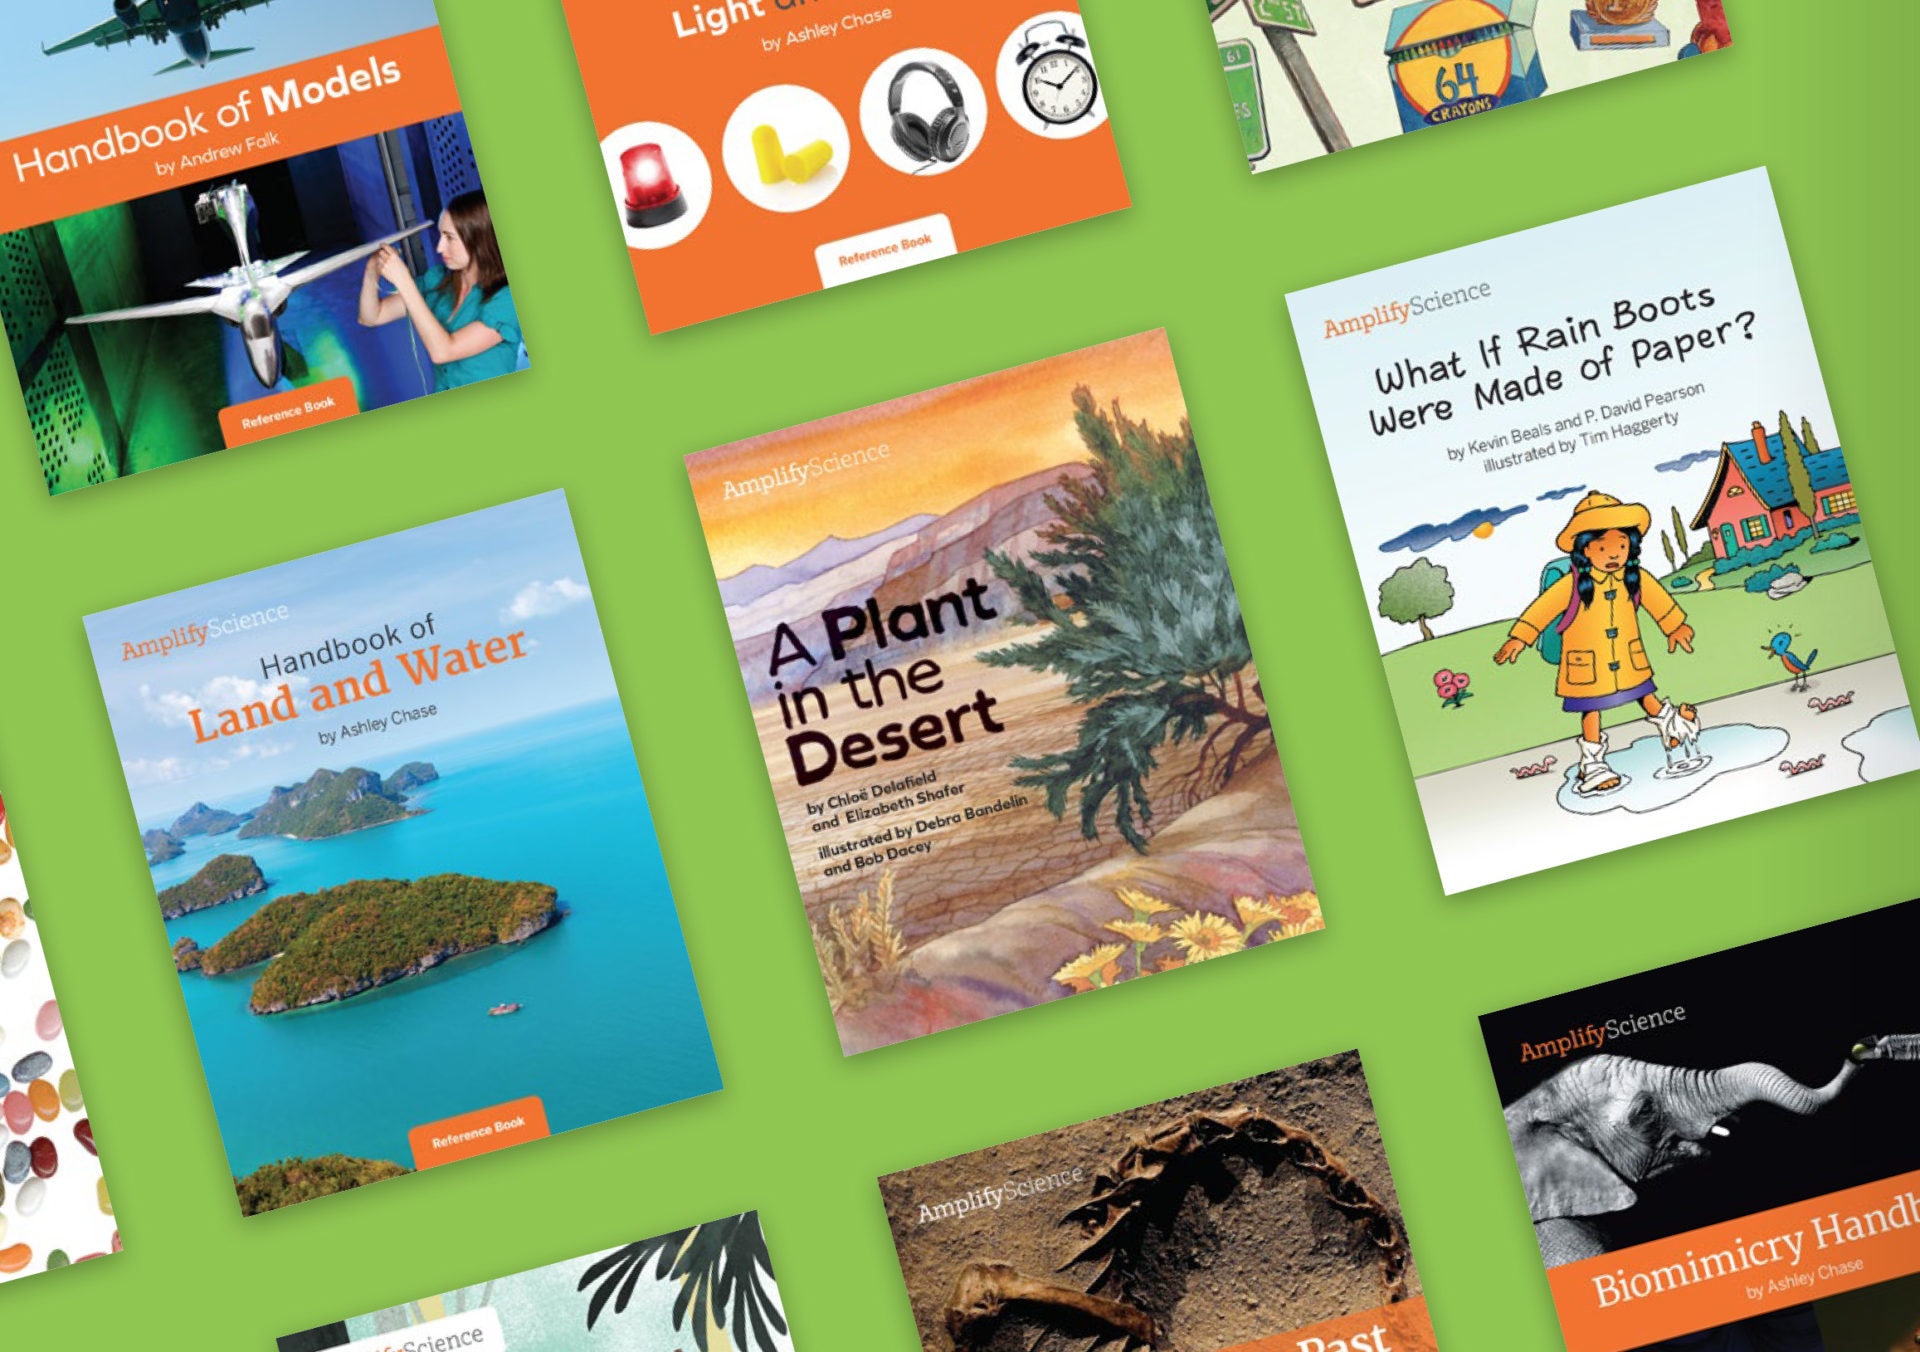 A collection of colorful educational book covers on science topics, displayed in a scattered arrangement on a green background.